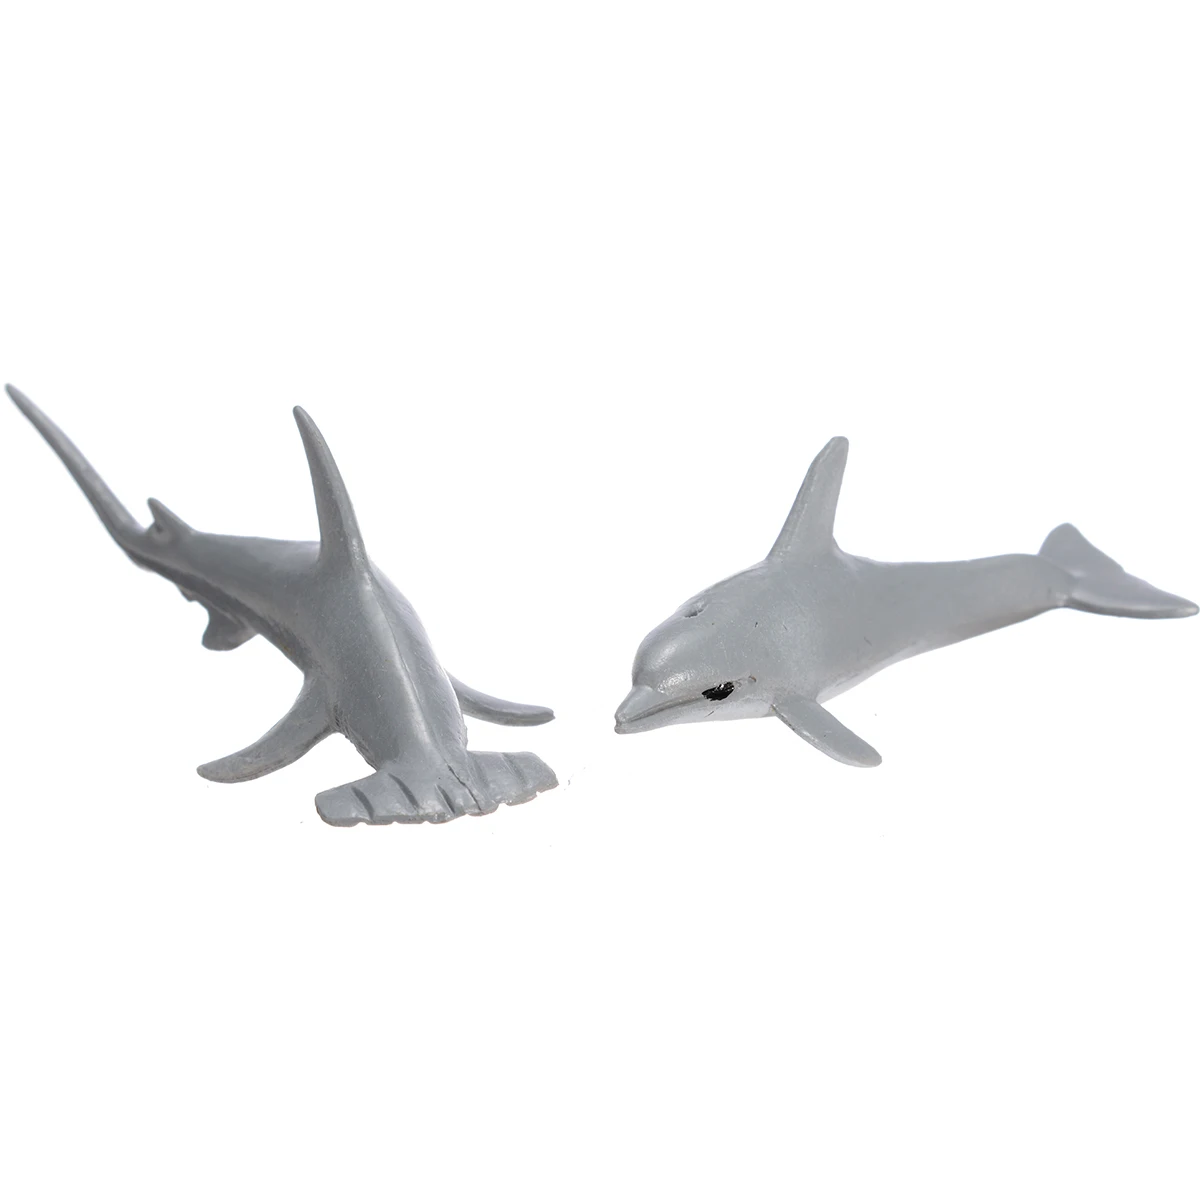 12pcs Ocean Sea Life Simulation Animal Model Sets Shark Whale Turtle Crab Dolphin Action Toy Figures Kids Educational Toys